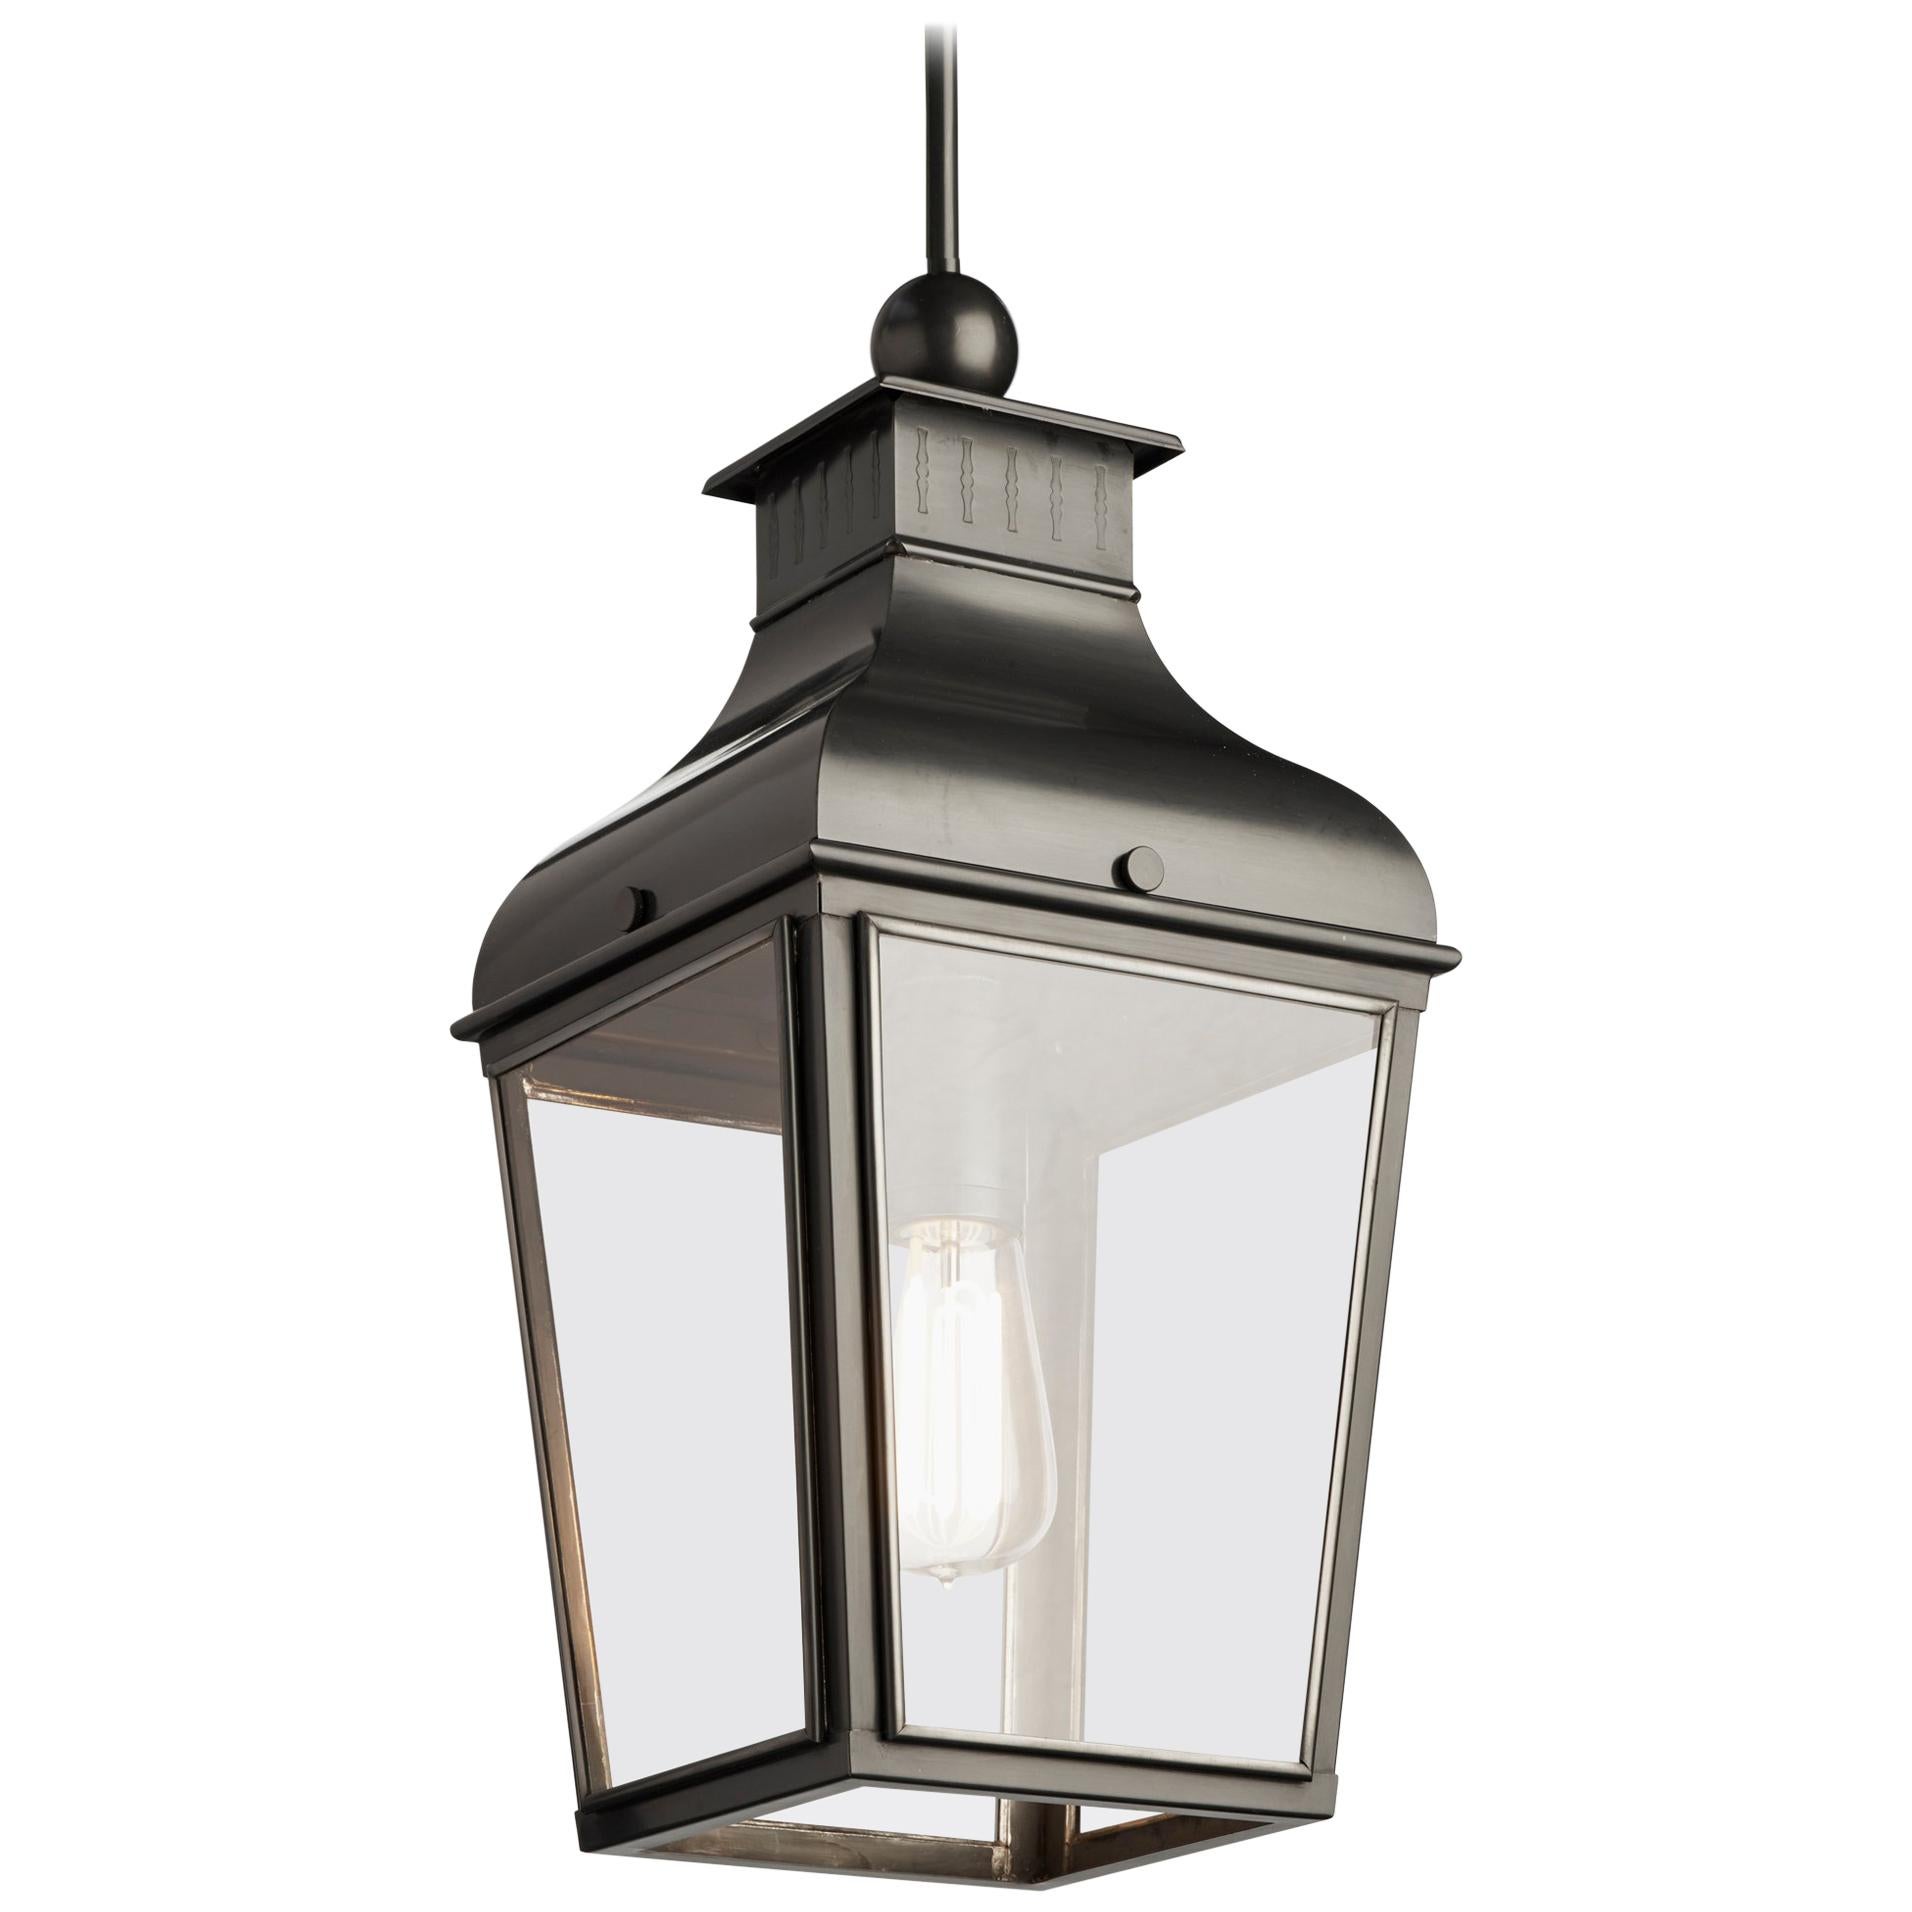 Tekna Montrose Small-C Pendant Light with Dark Bronze Finish and Clear Glass